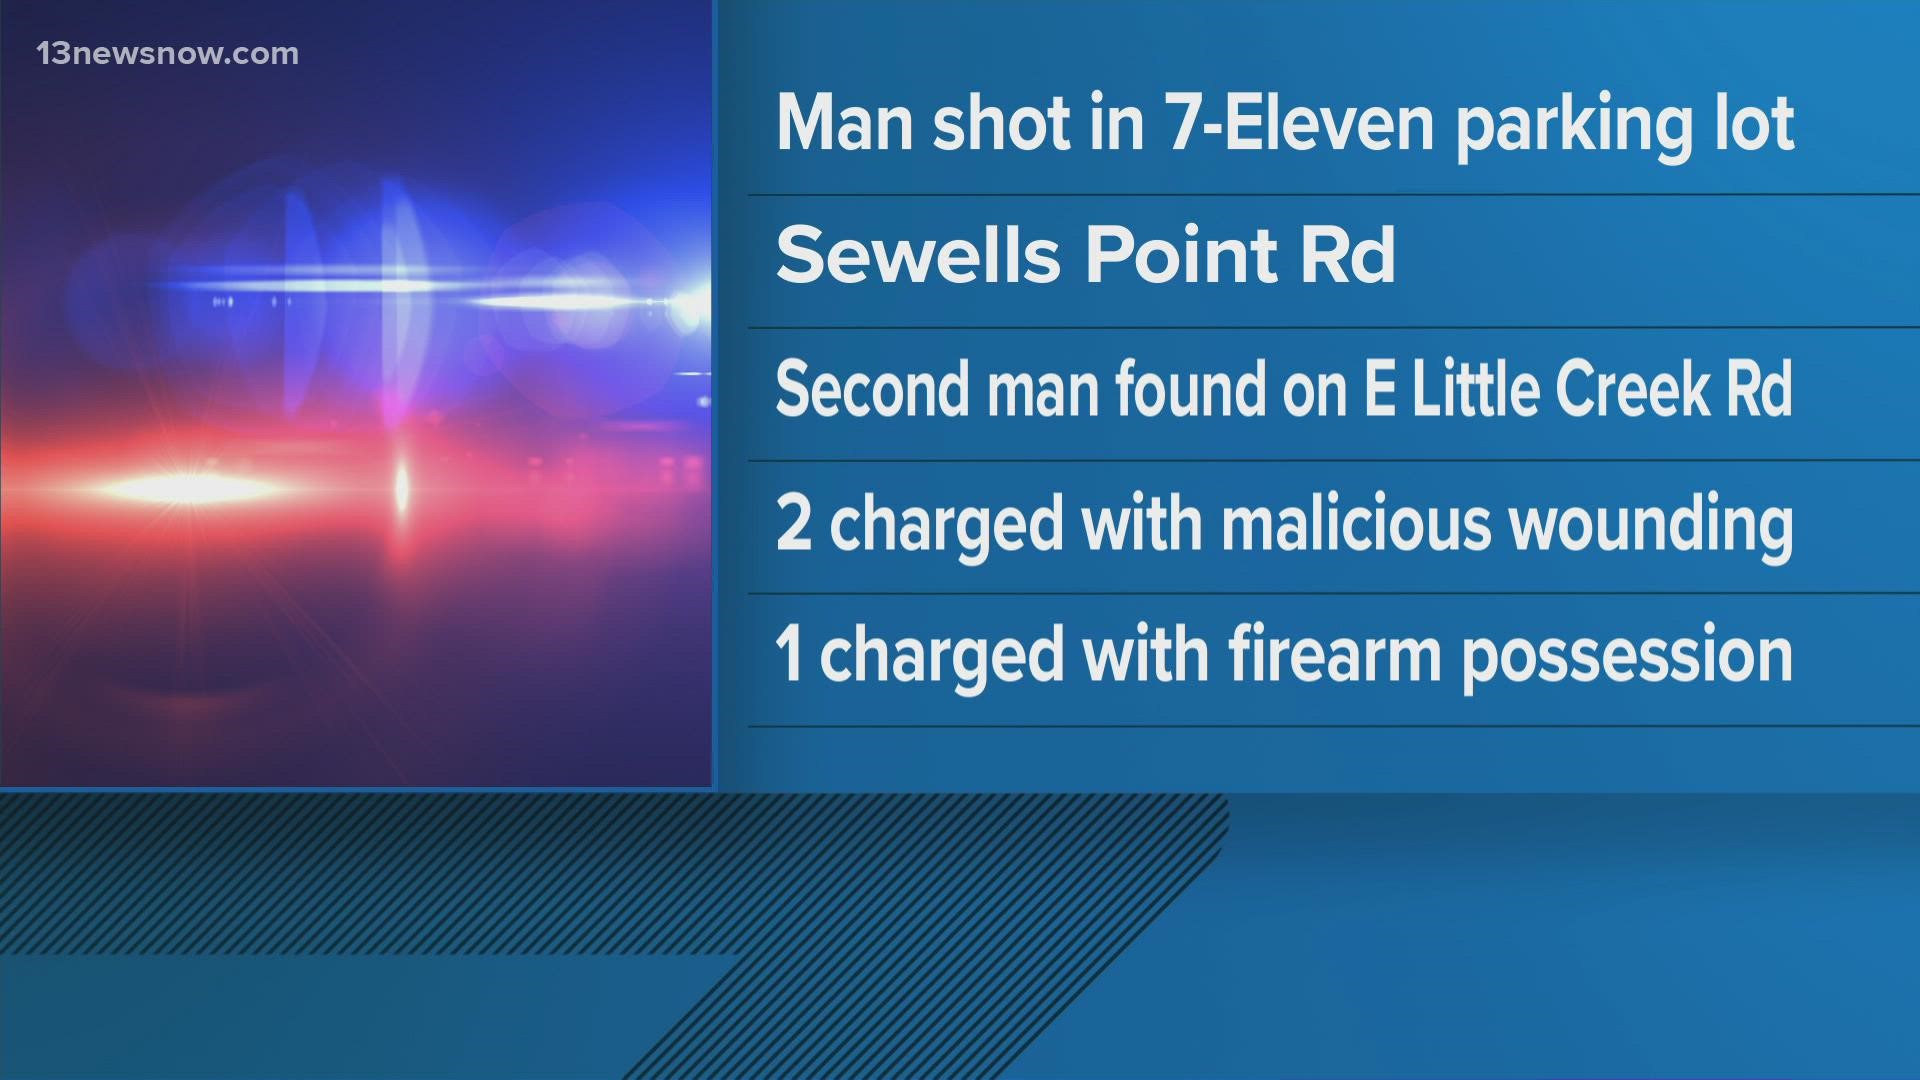 The victims were found at Sewells Point Road and E. Little Creek Road. Two people were charged with malicious wounding, and another with firearm possession.